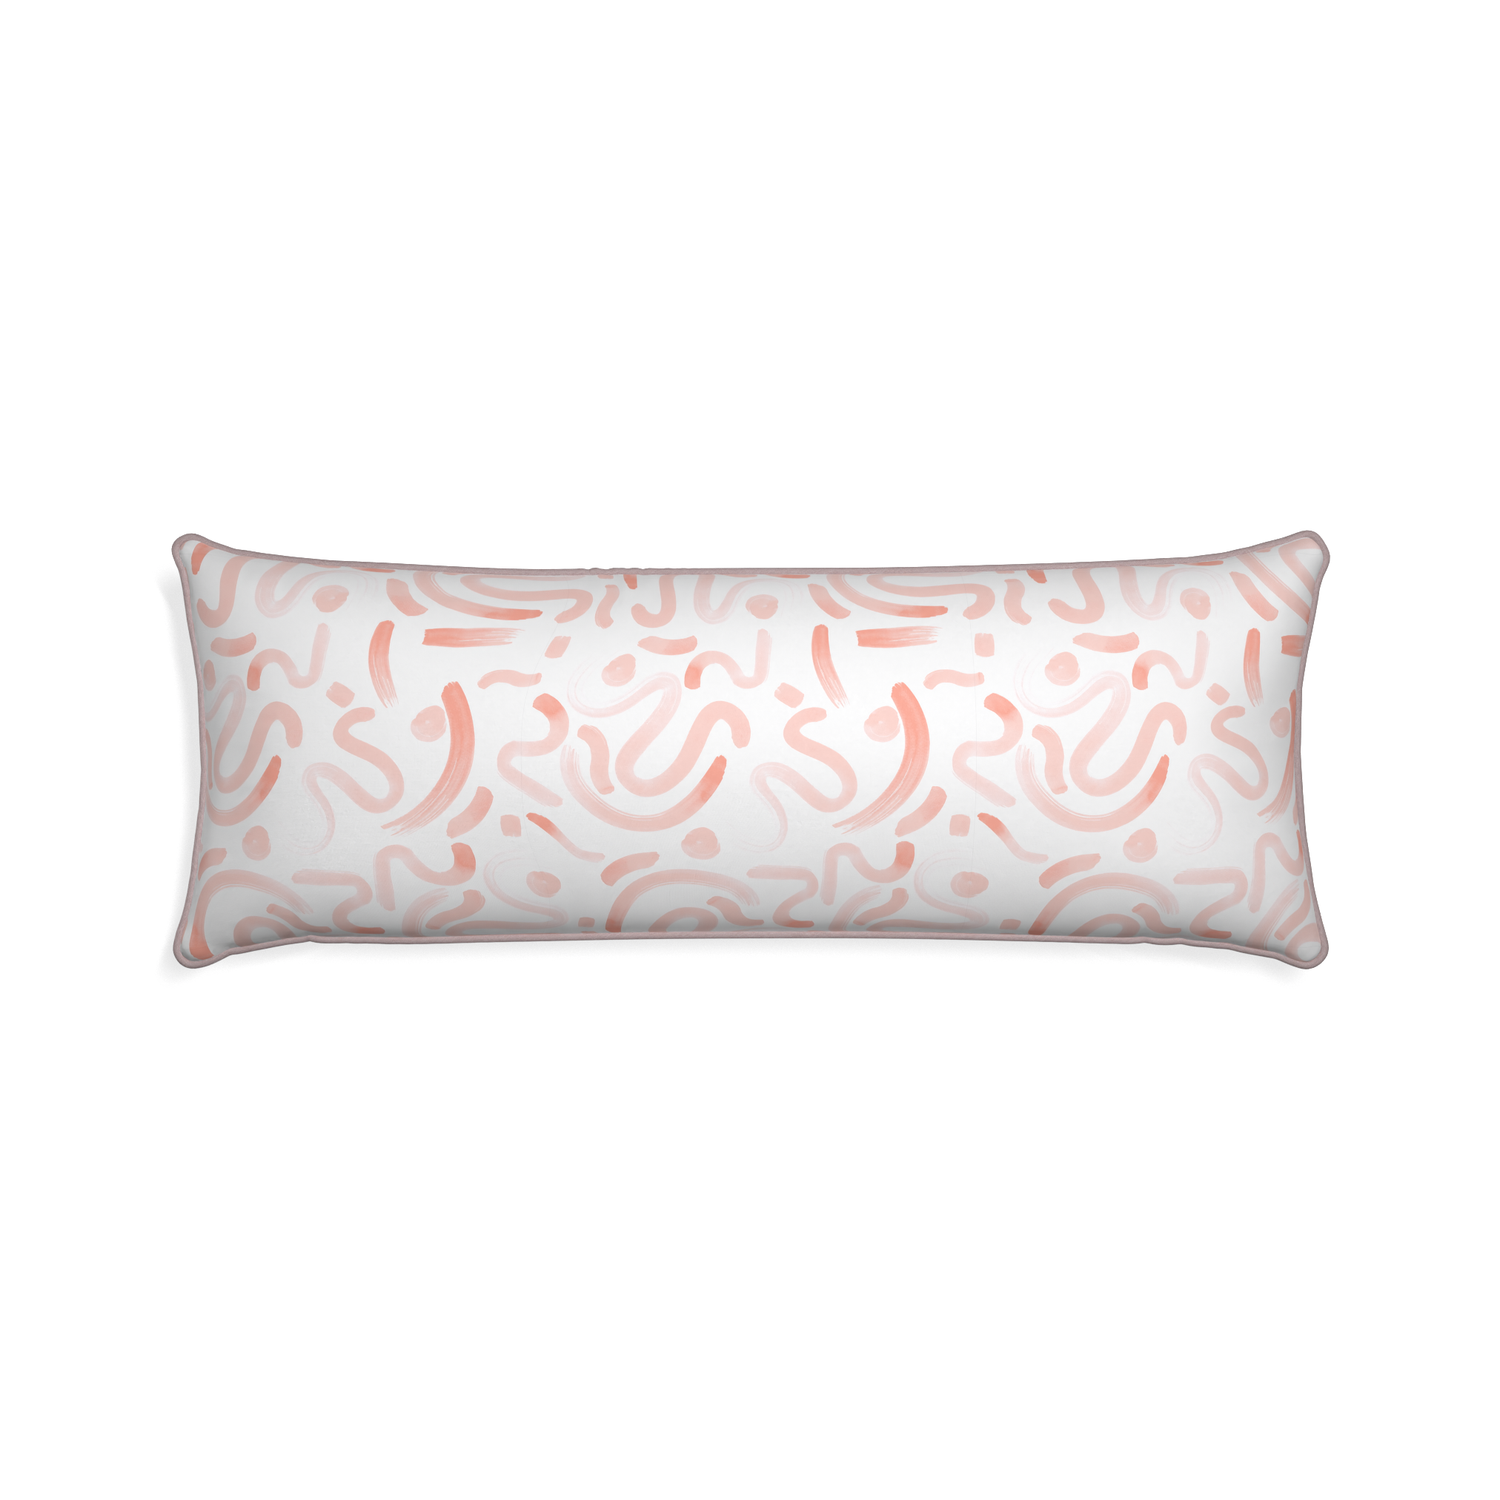 Xl-lumbar hockney pink custom pink graphicpillow with orchid piping on white background